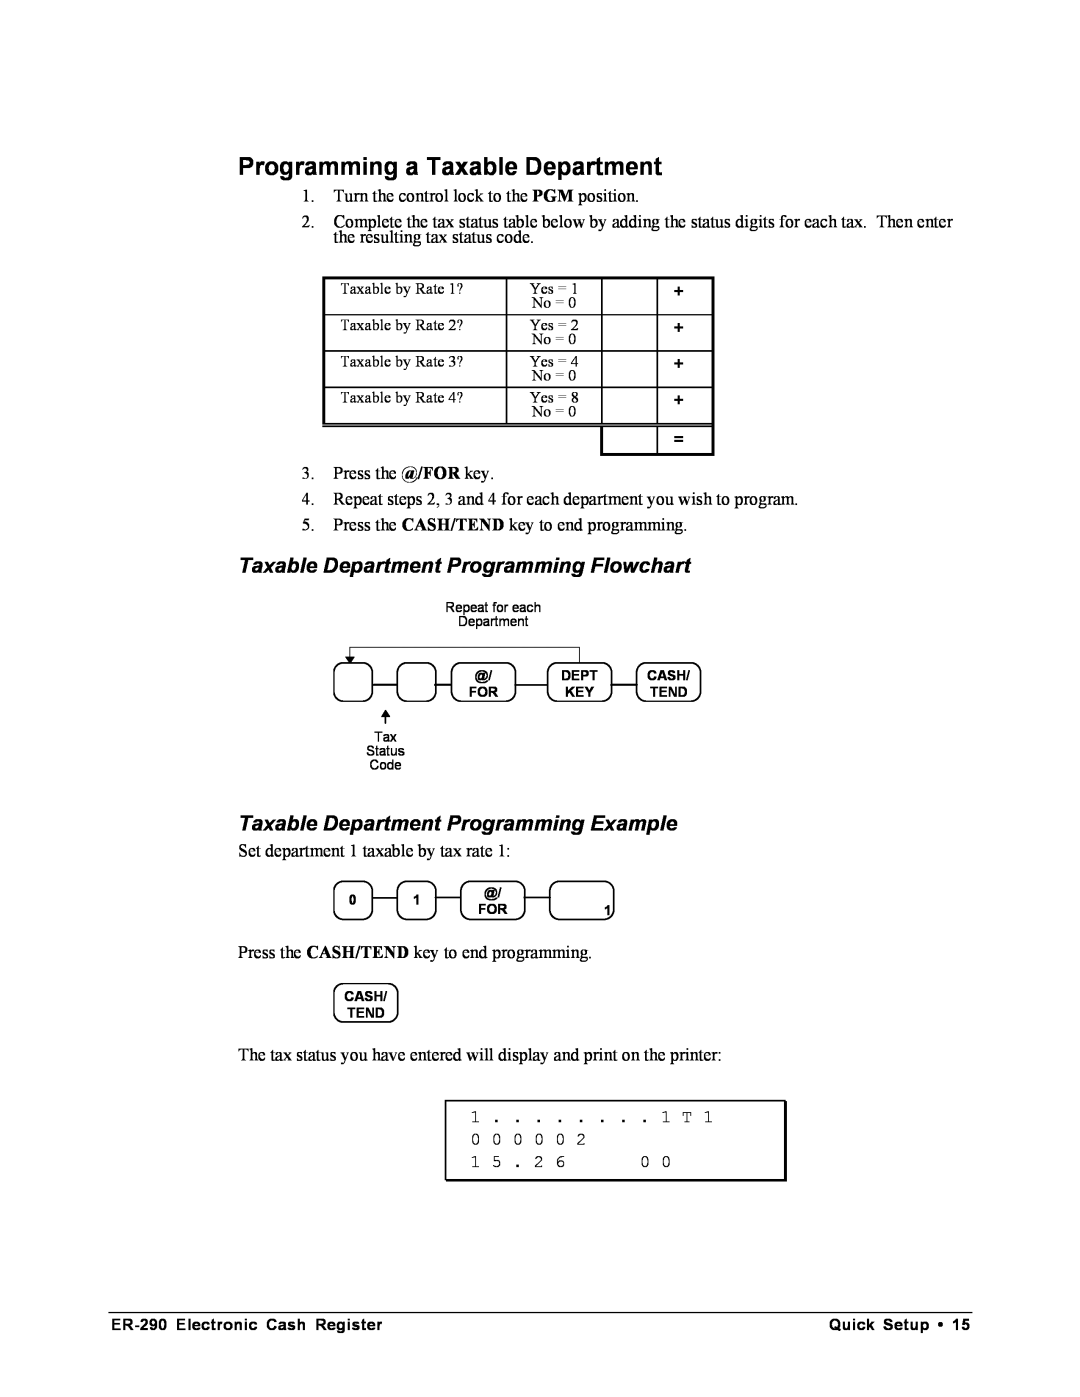 Samsung M-ER290 specifications Programming a Taxable Department, Taxable Department Programming Flowchart 